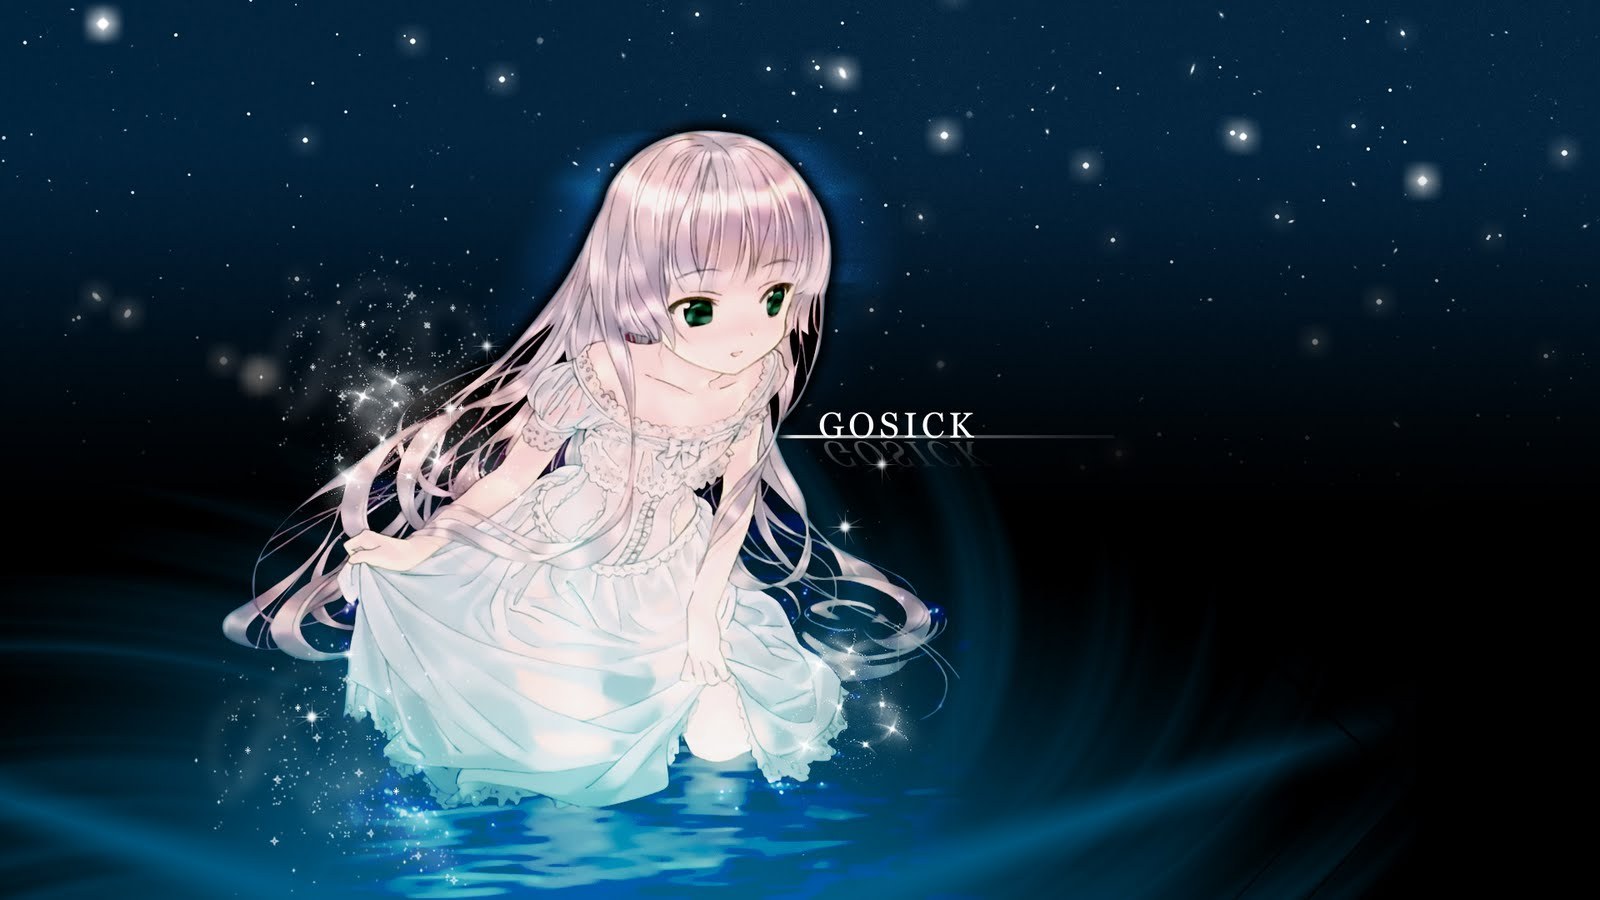 Gosick images Gosick HD wallpaper and background photos 26104913